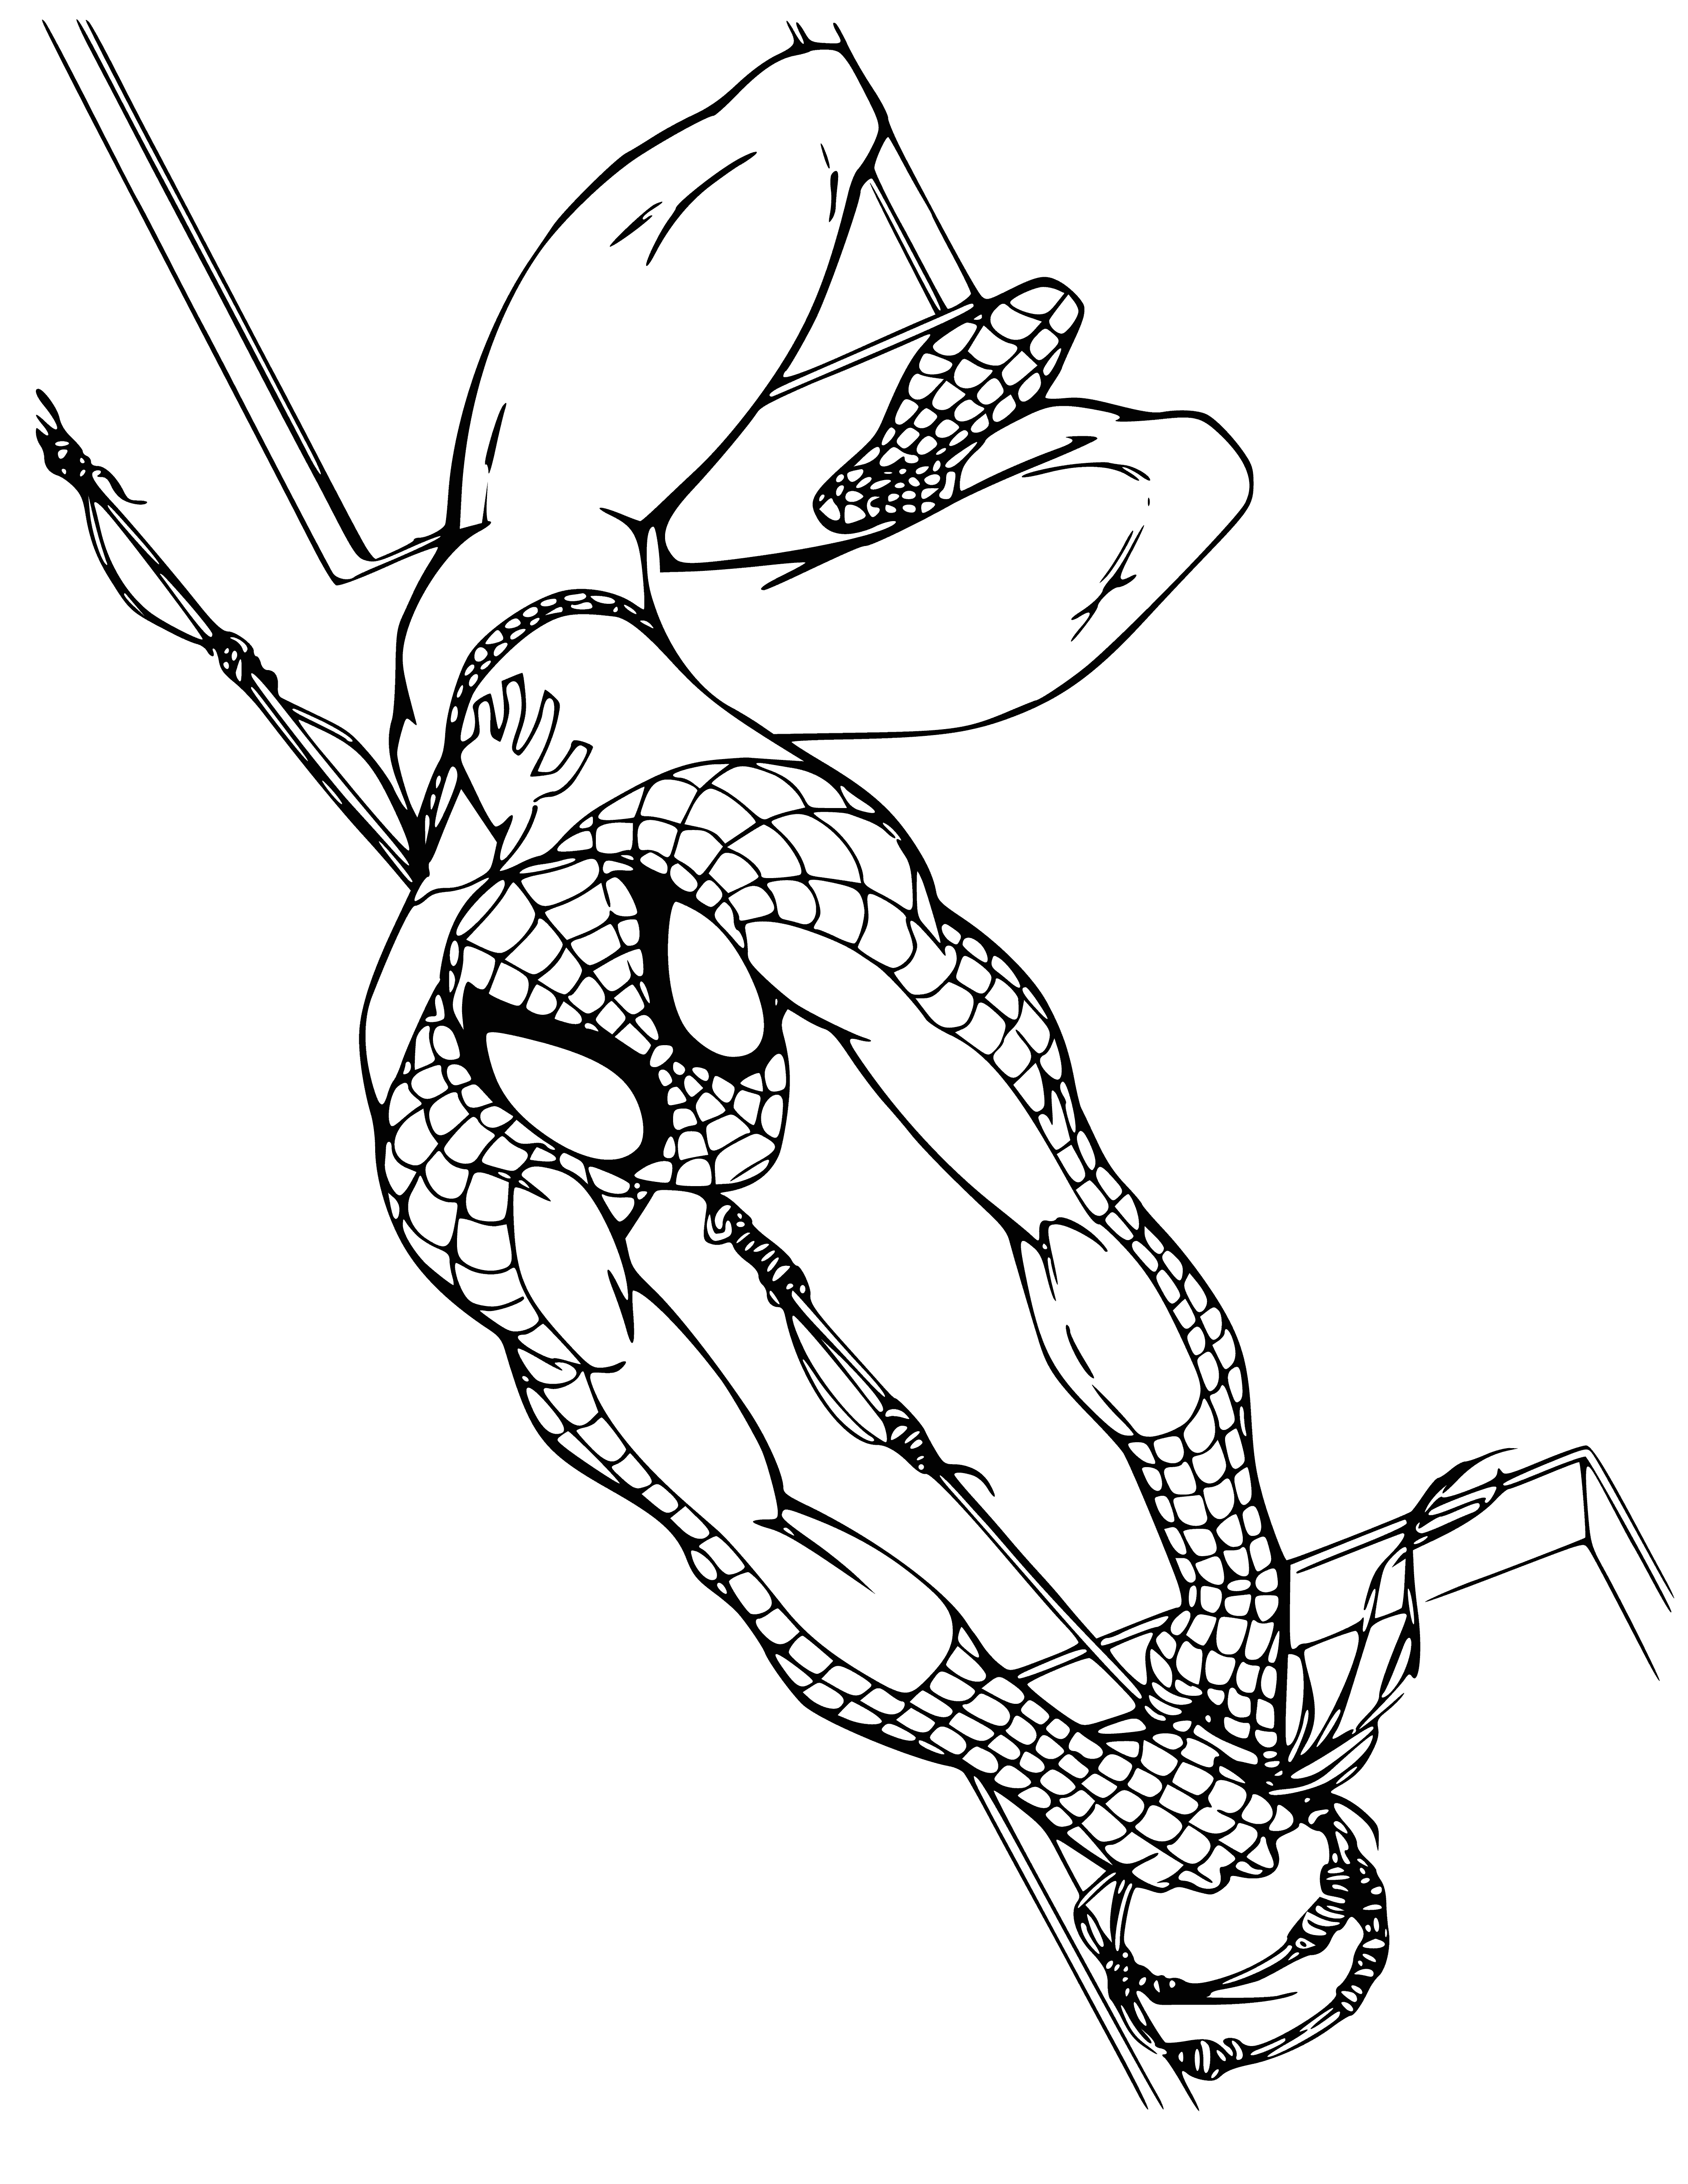 coloring page: Man in Spiderman suit w/ mask & crossed arms stands against brick wall, signature red & blue suit. #coloring